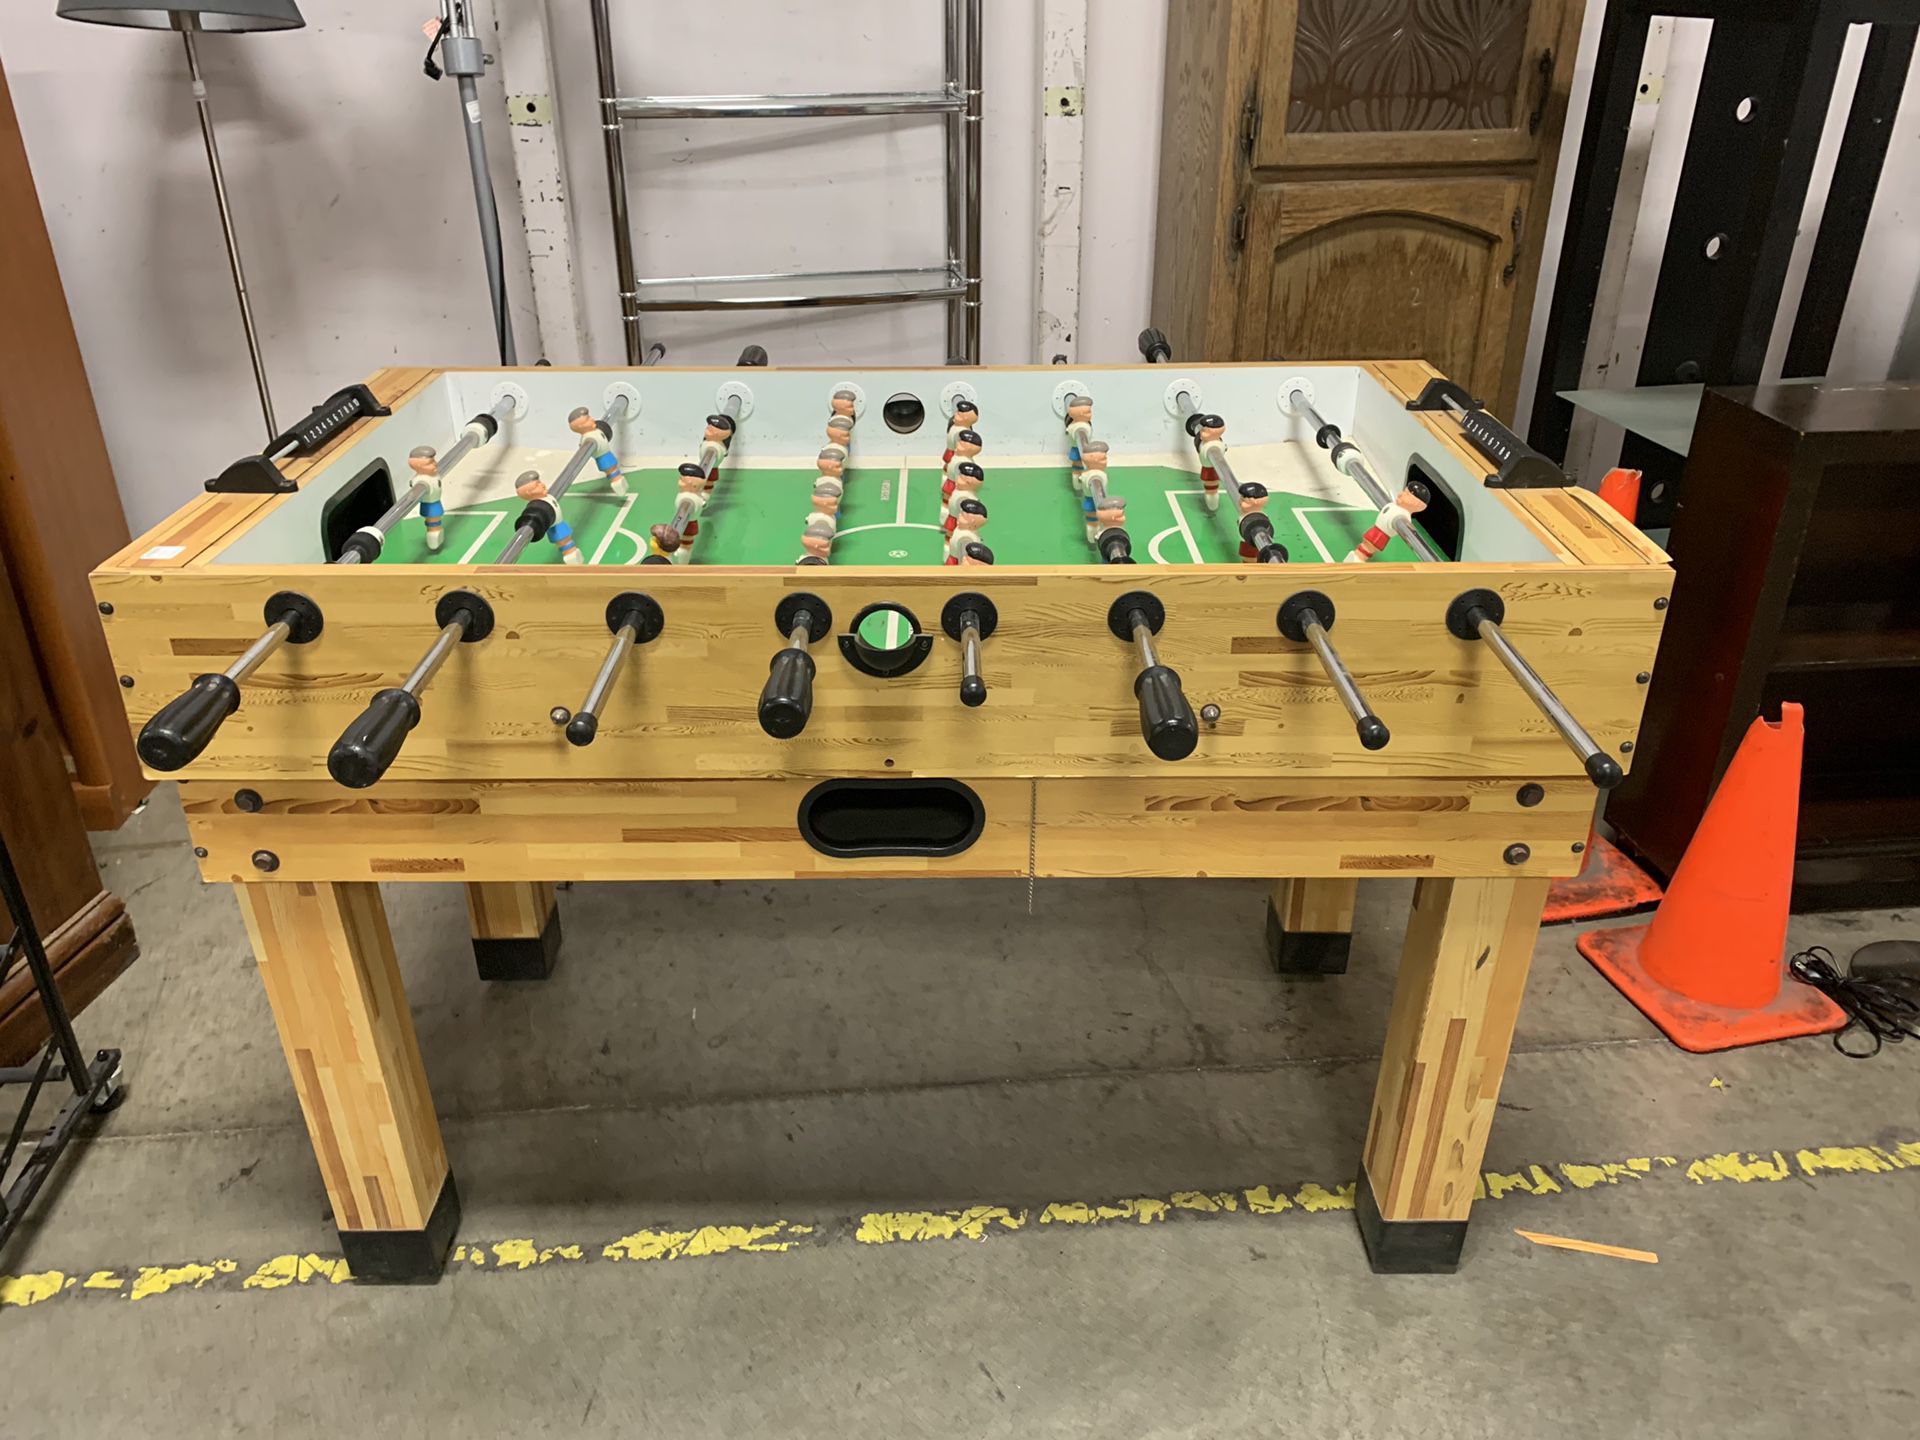 Foosball table – excellent condition and retails for $500